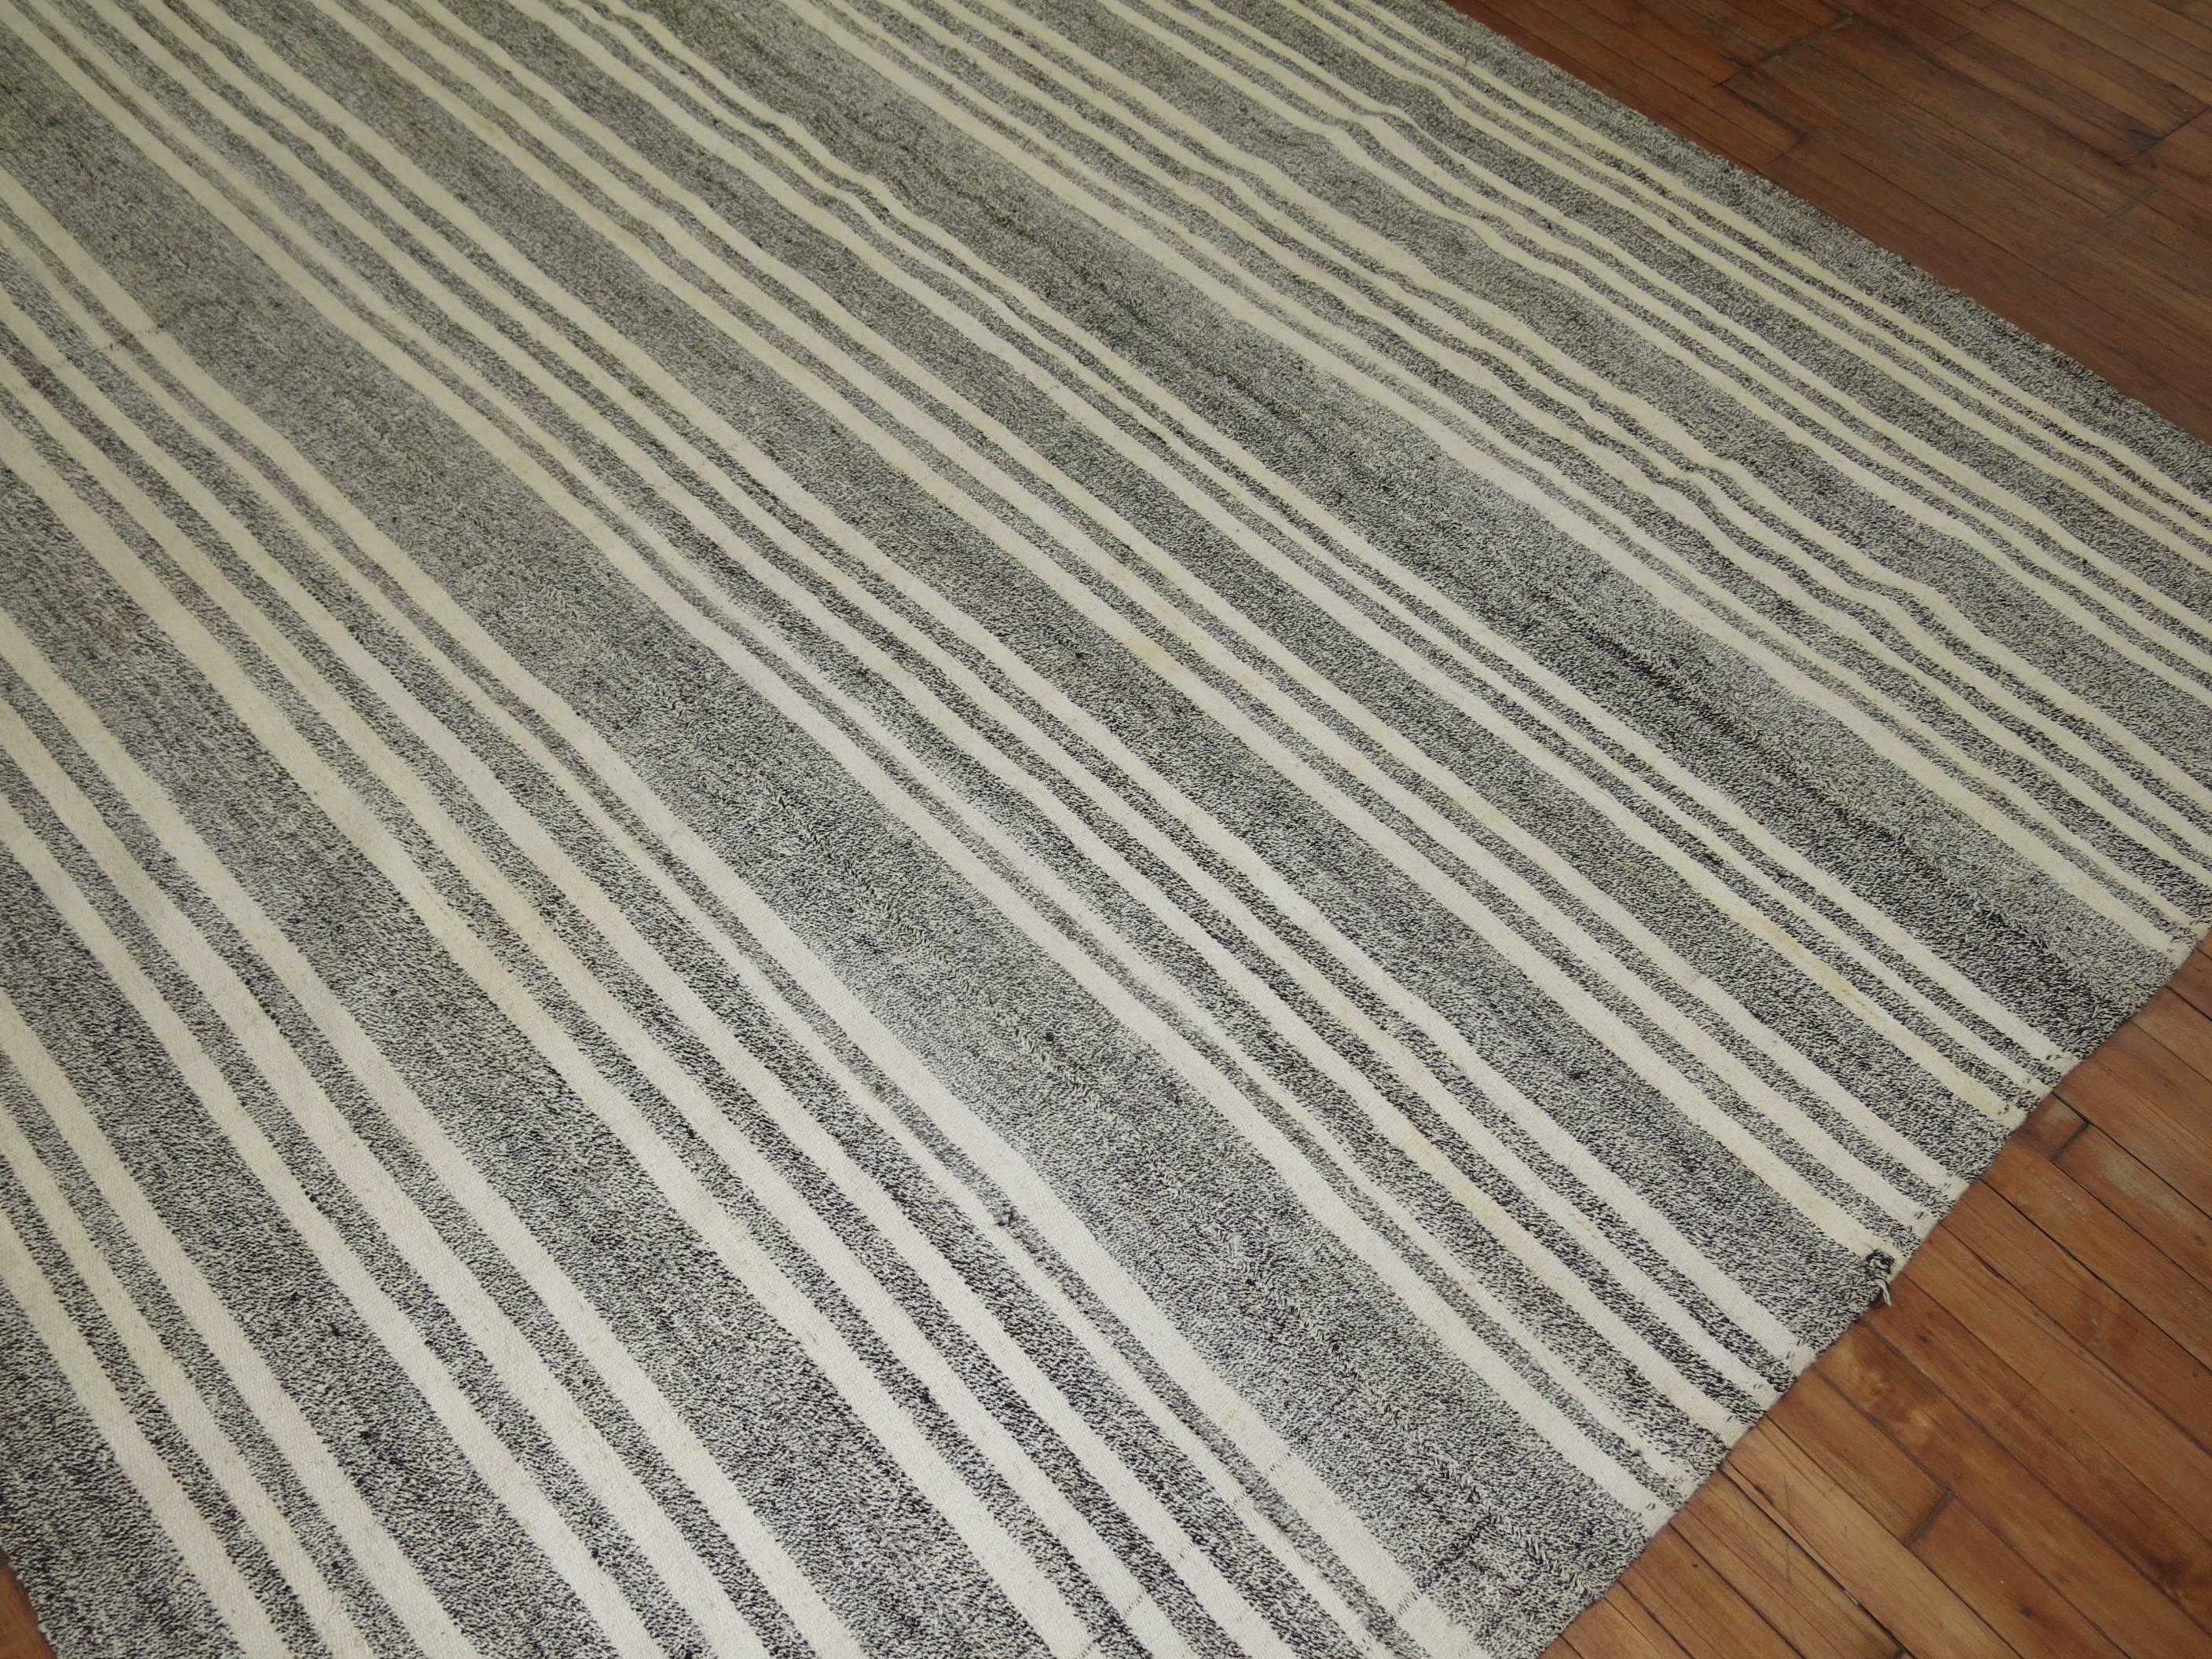 Vintage Turkish Kilim in gray and white.